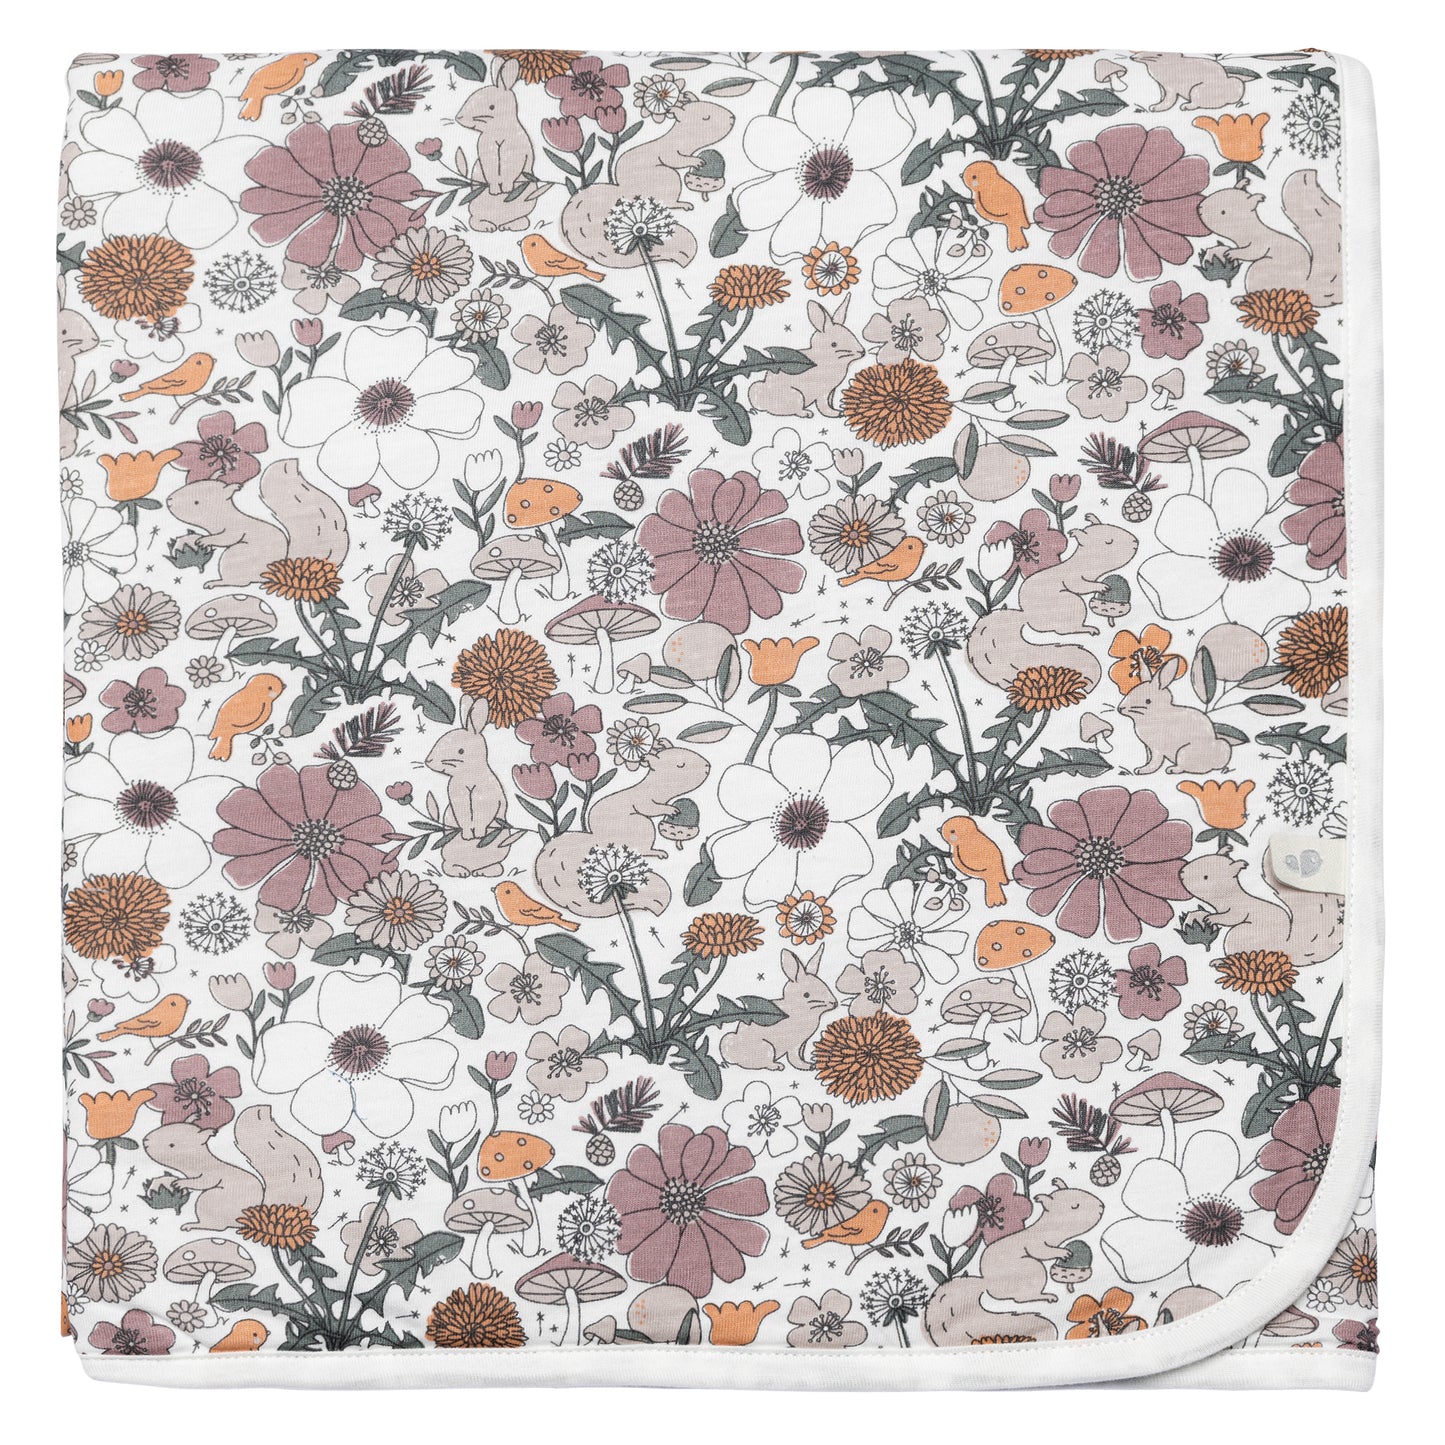 Bamboo blanket - Floral Patch